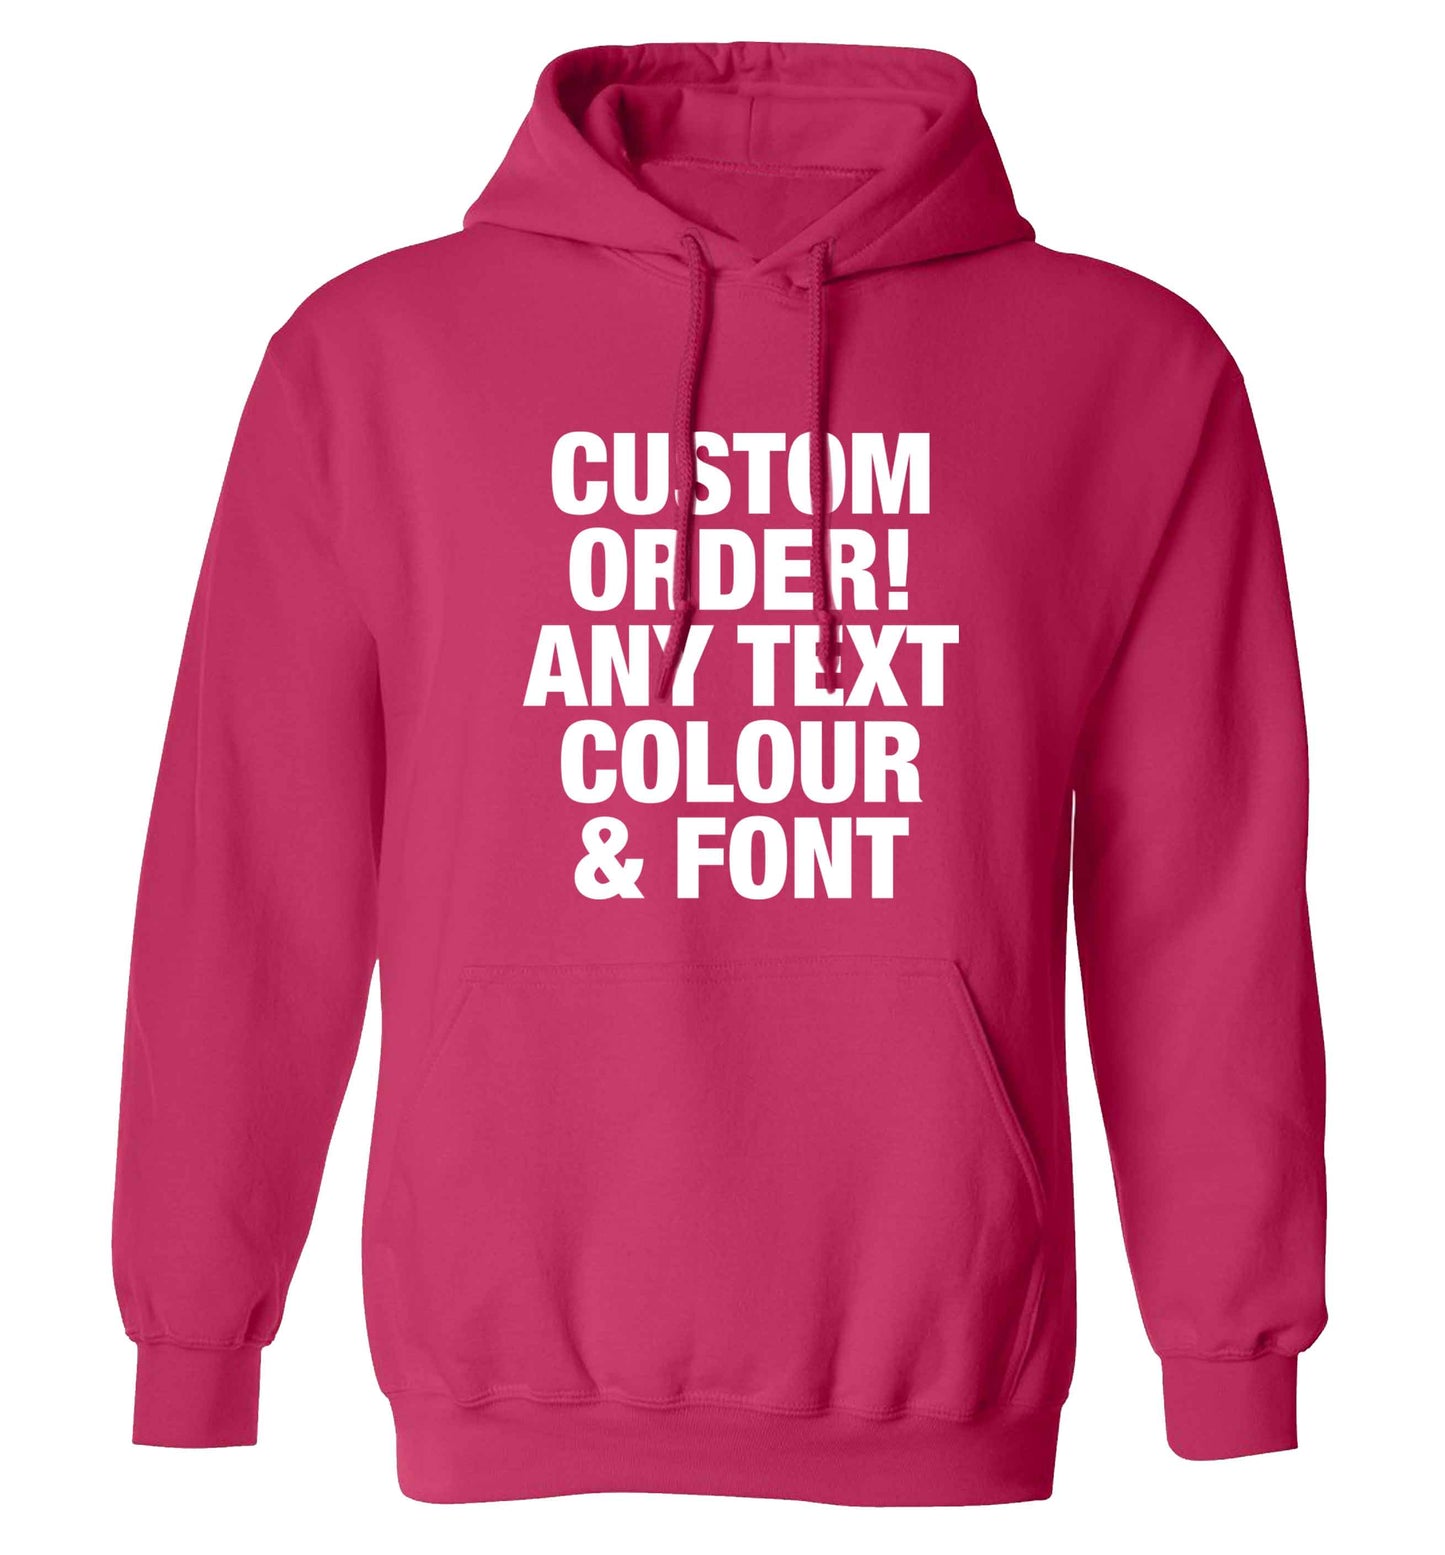 Custom order any text colour and font adults unisex pink hoodie 2XL